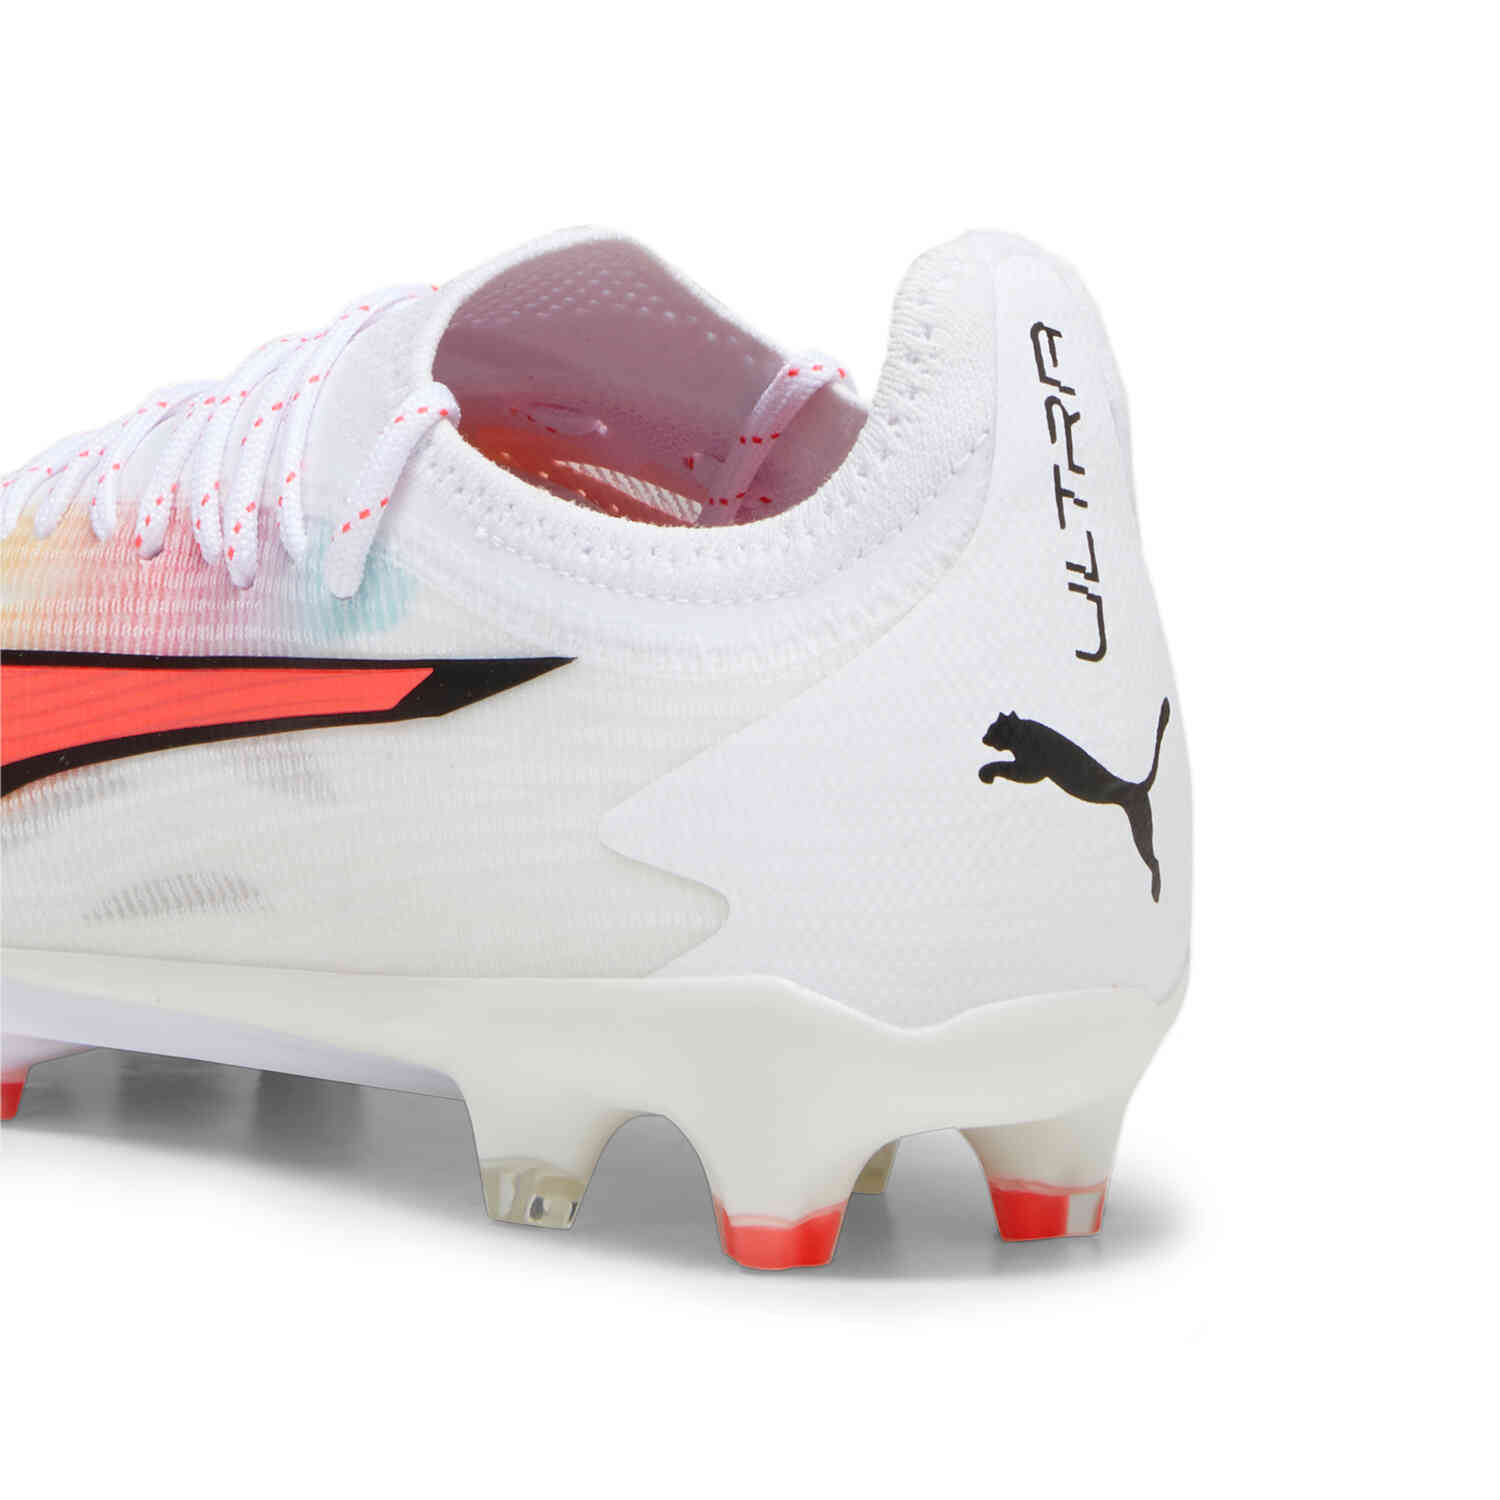 PUMA ULTRA ULTIMATE FG/AG Soccer Cleats - White, Black & Fire Orchid -  Soccer Master